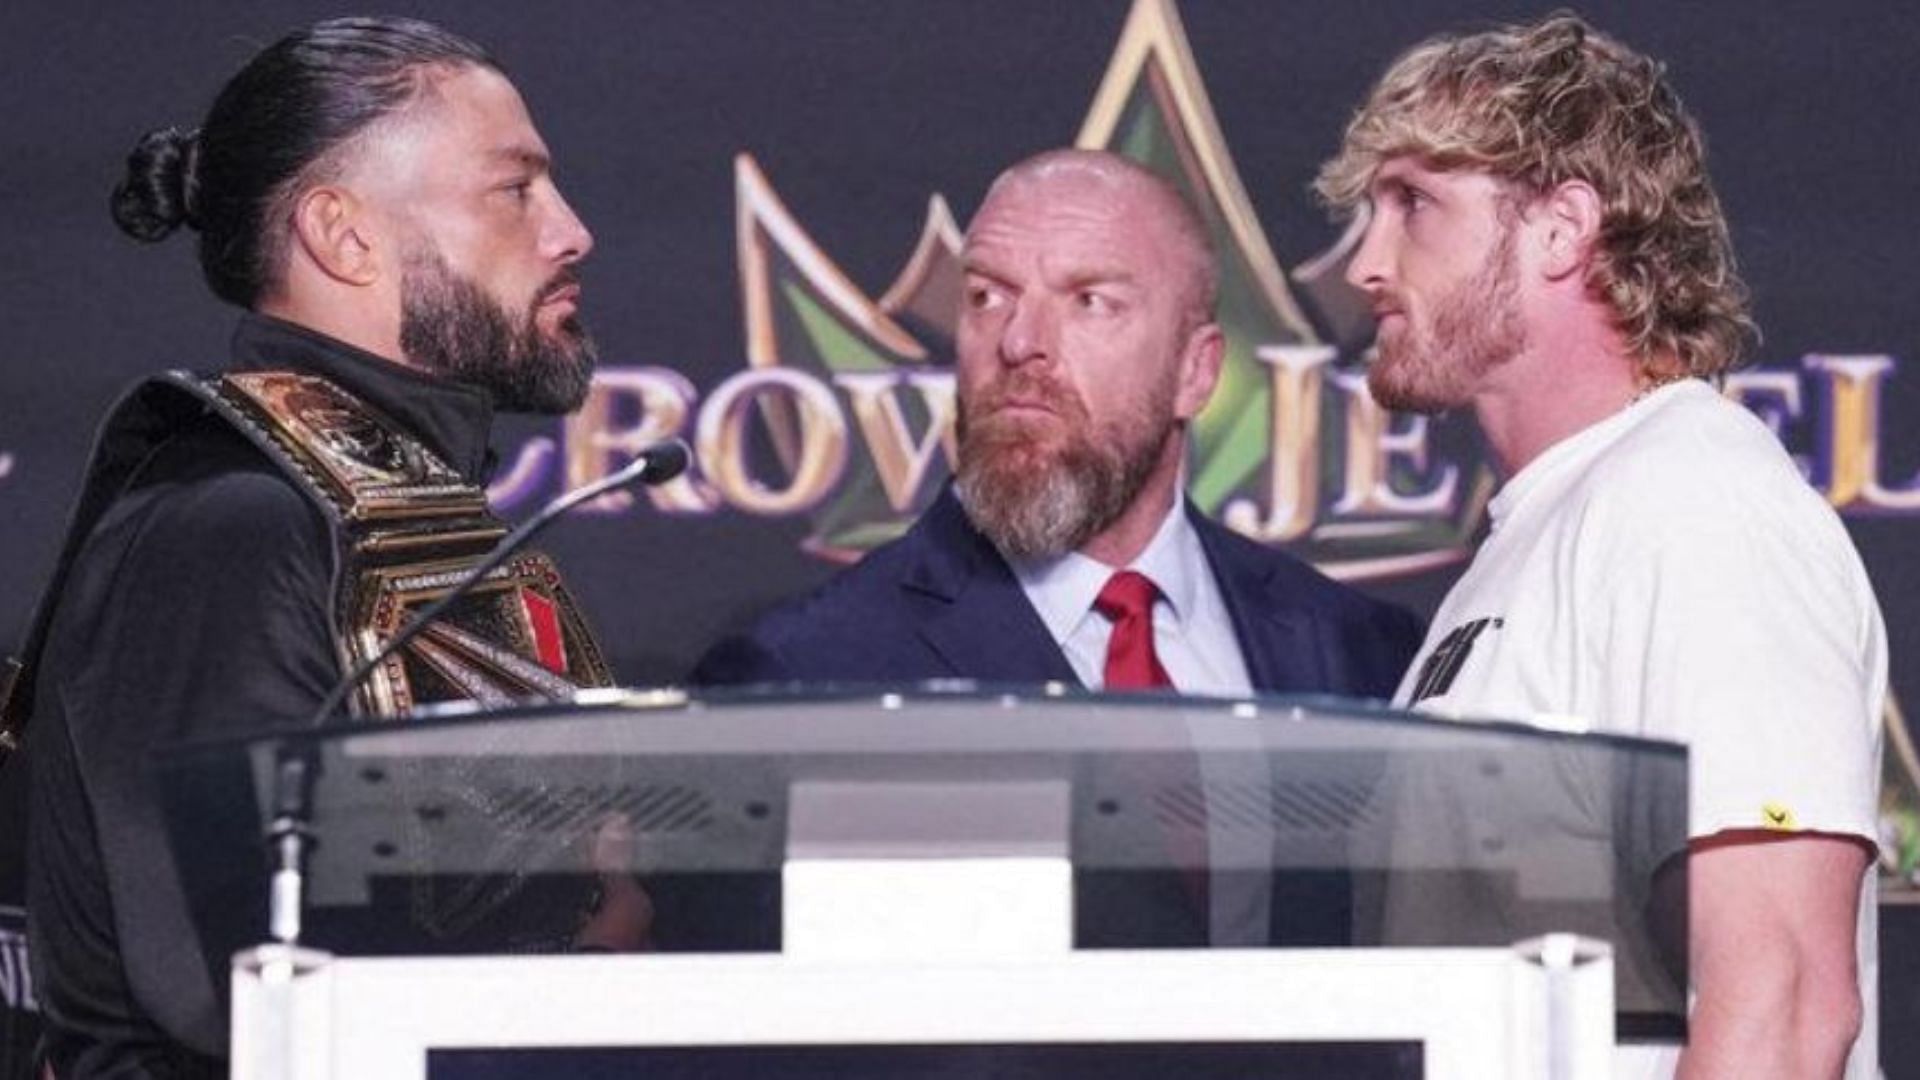 Roman Reigns vs. Logan Paul is going to be a massive encounter.